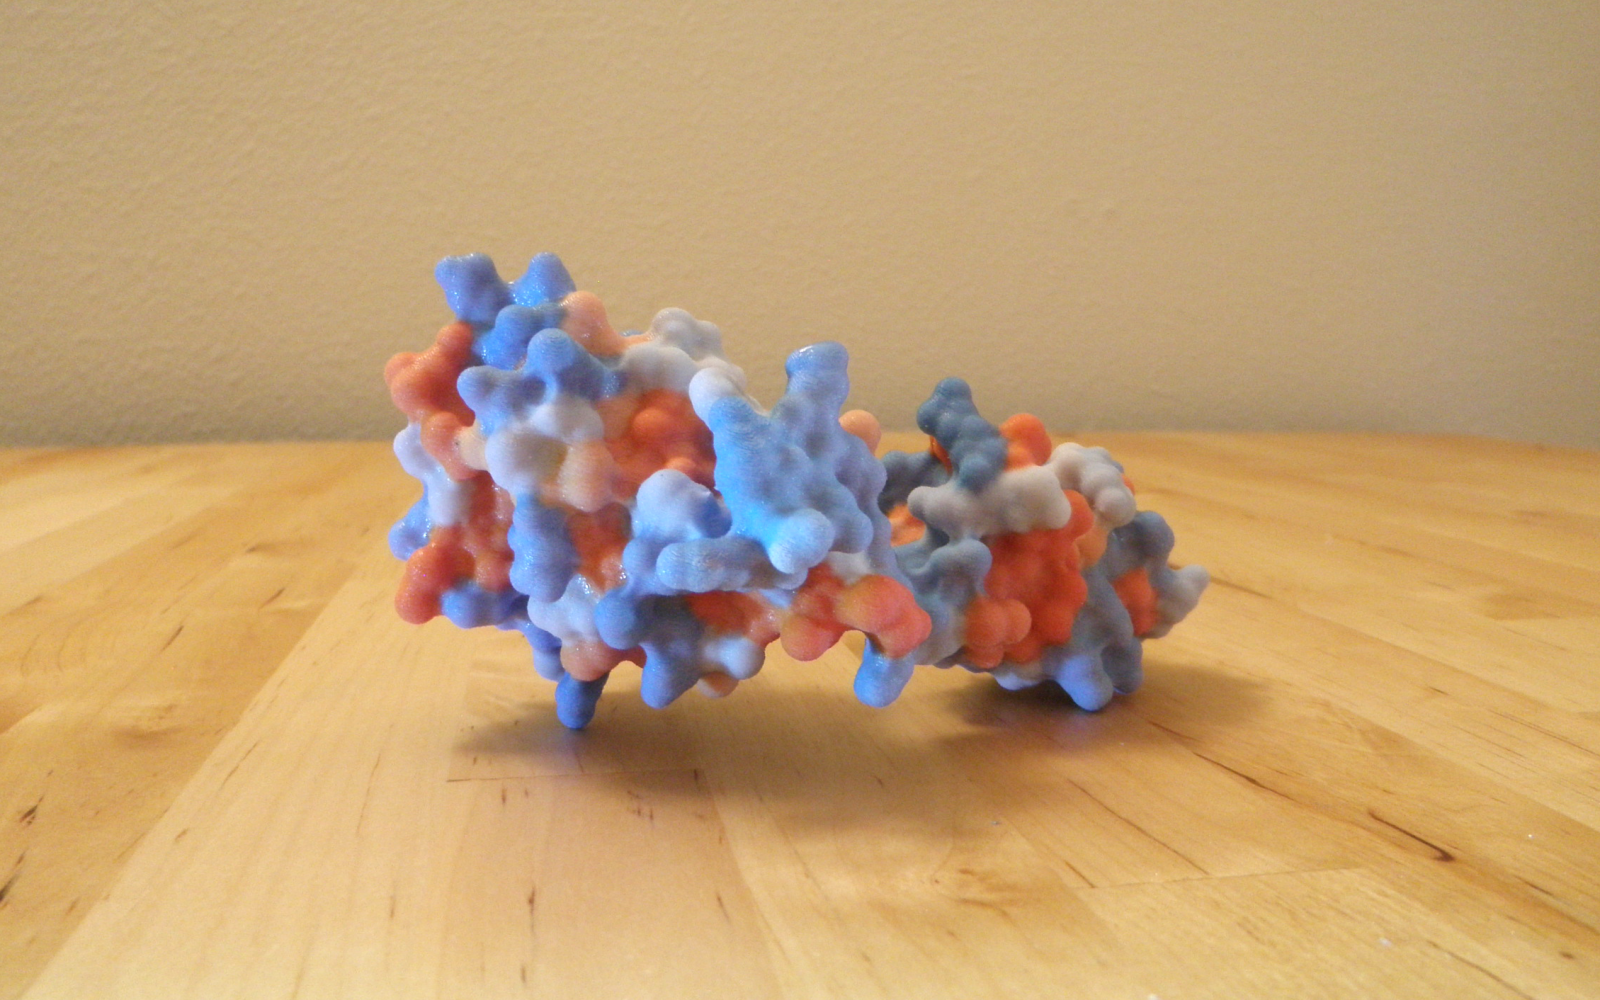 3D Printed Protein / http://www.over-engineered.com